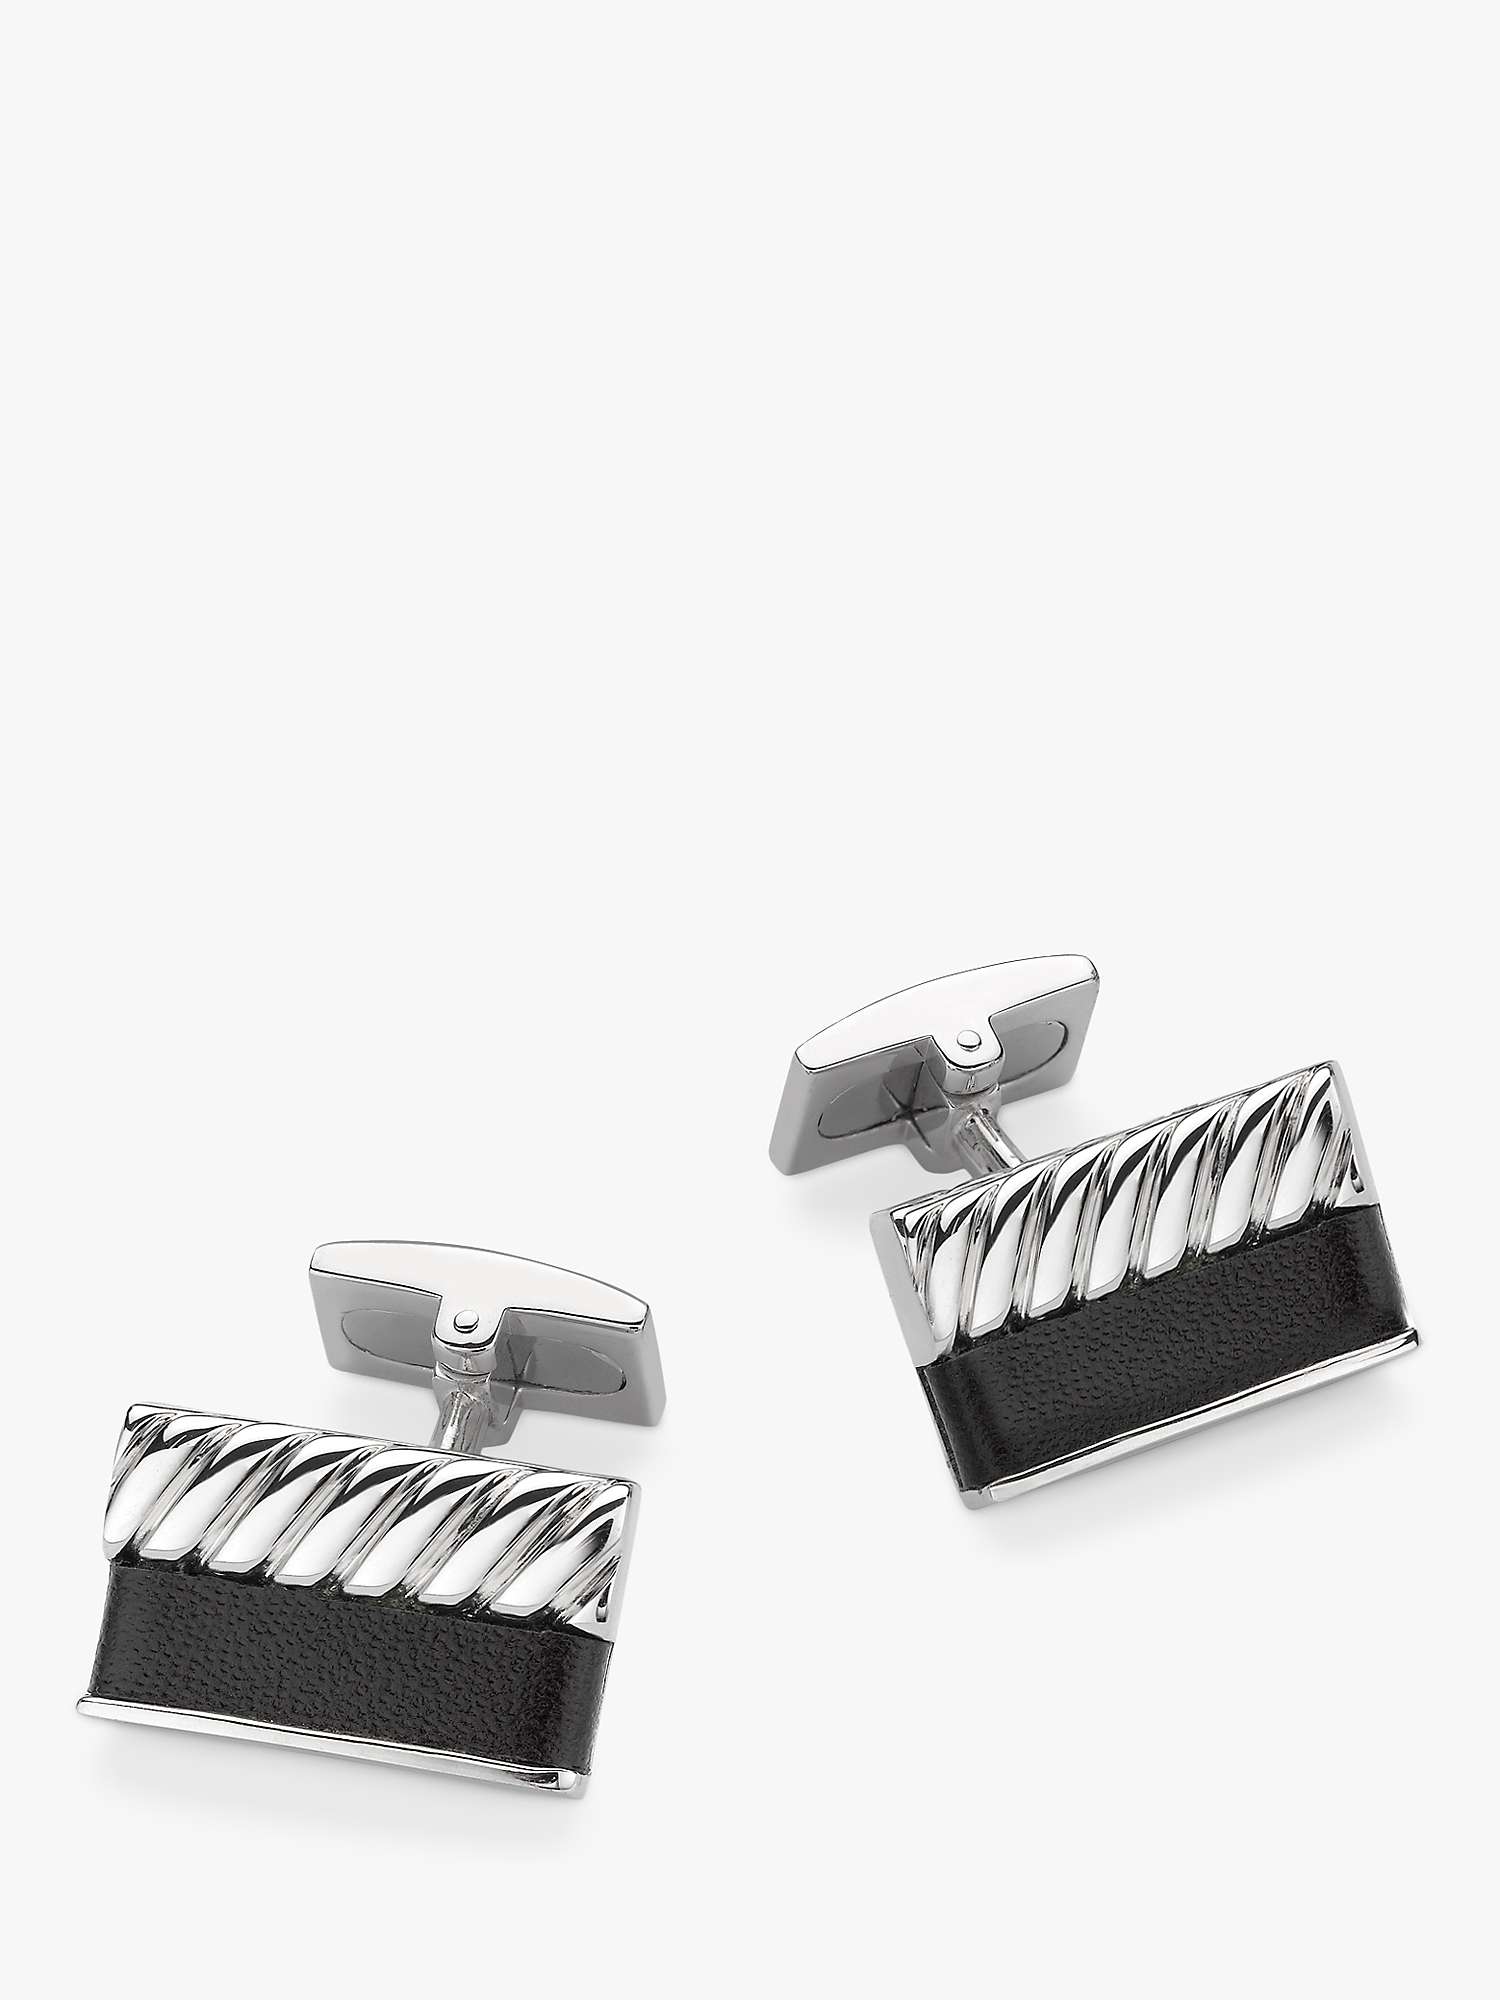 Buy Hoxton London Bold Leather Twist Rectangle Cufflinks, Silver/Black Online at johnlewis.com